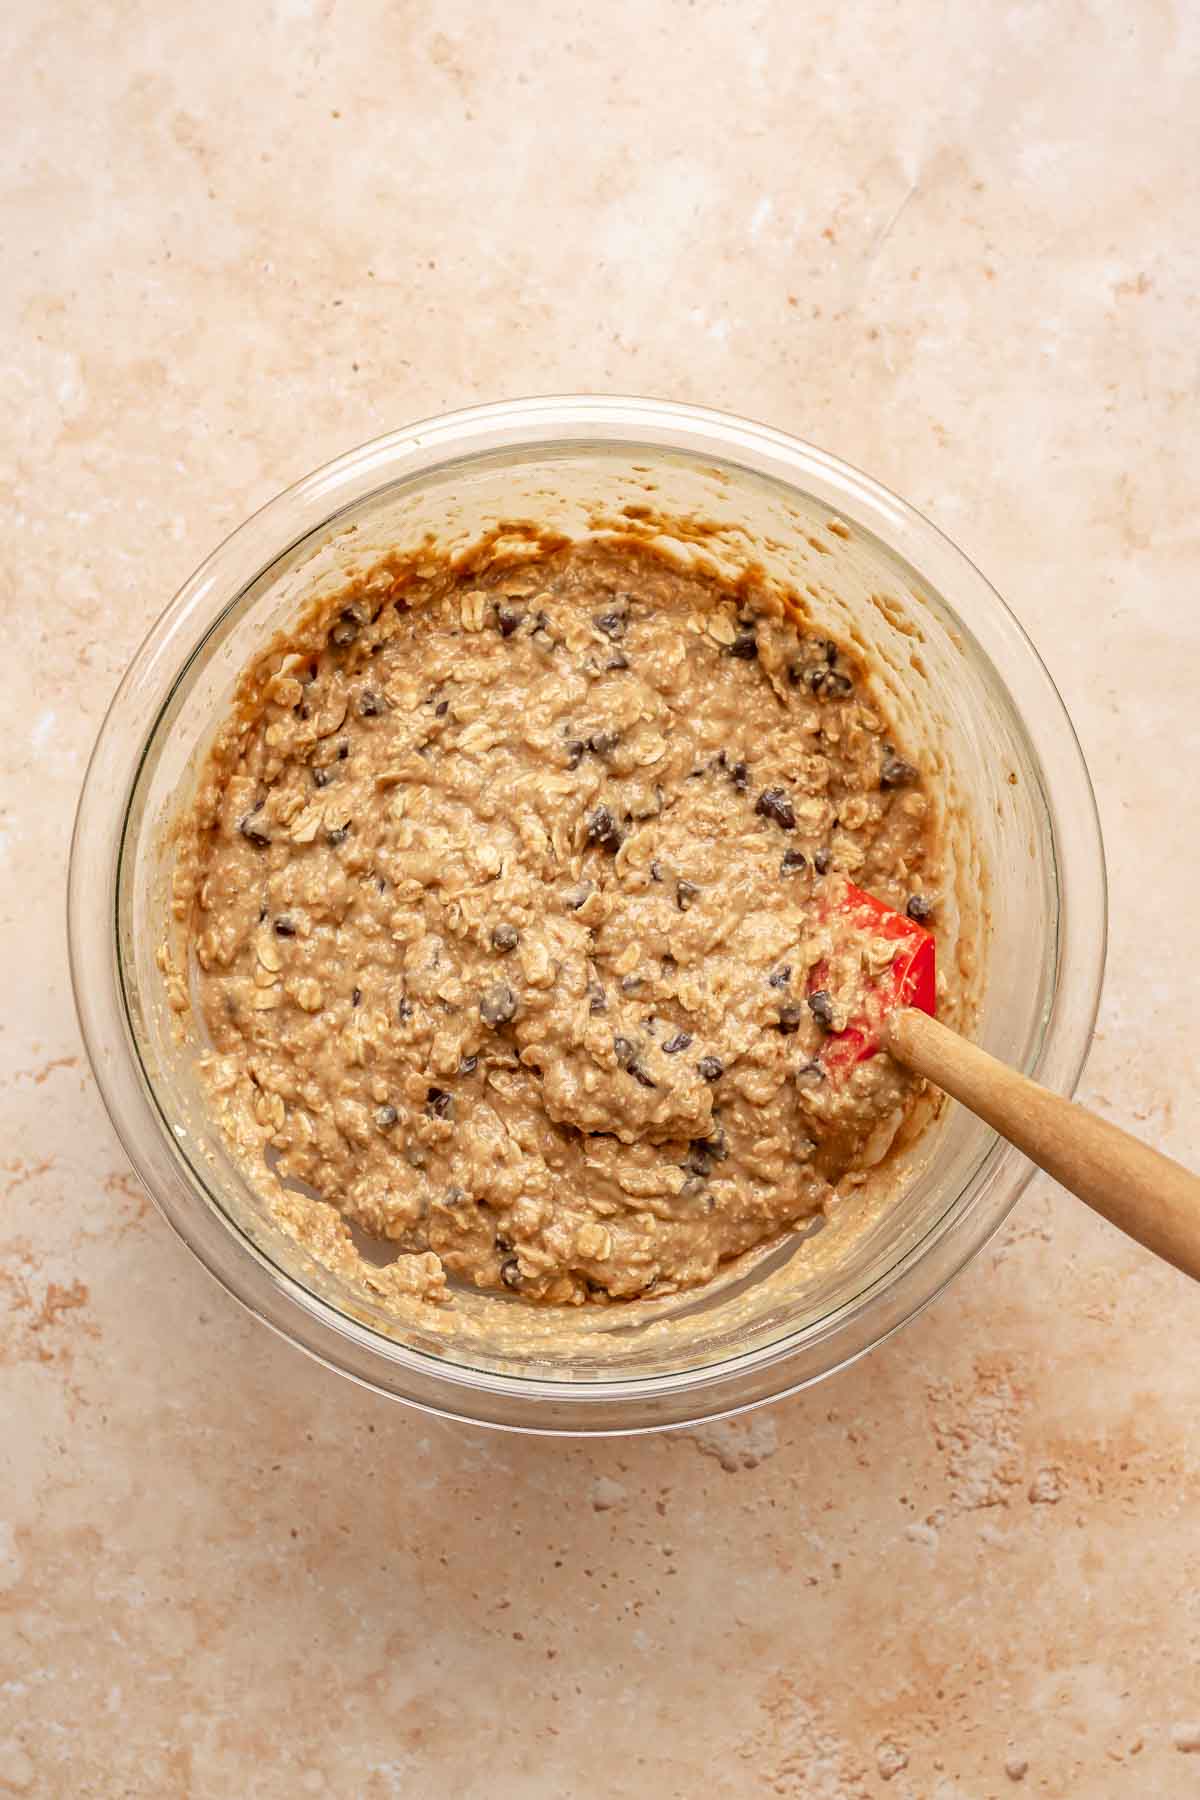 Finished batter with chocolate chips in a bowl.